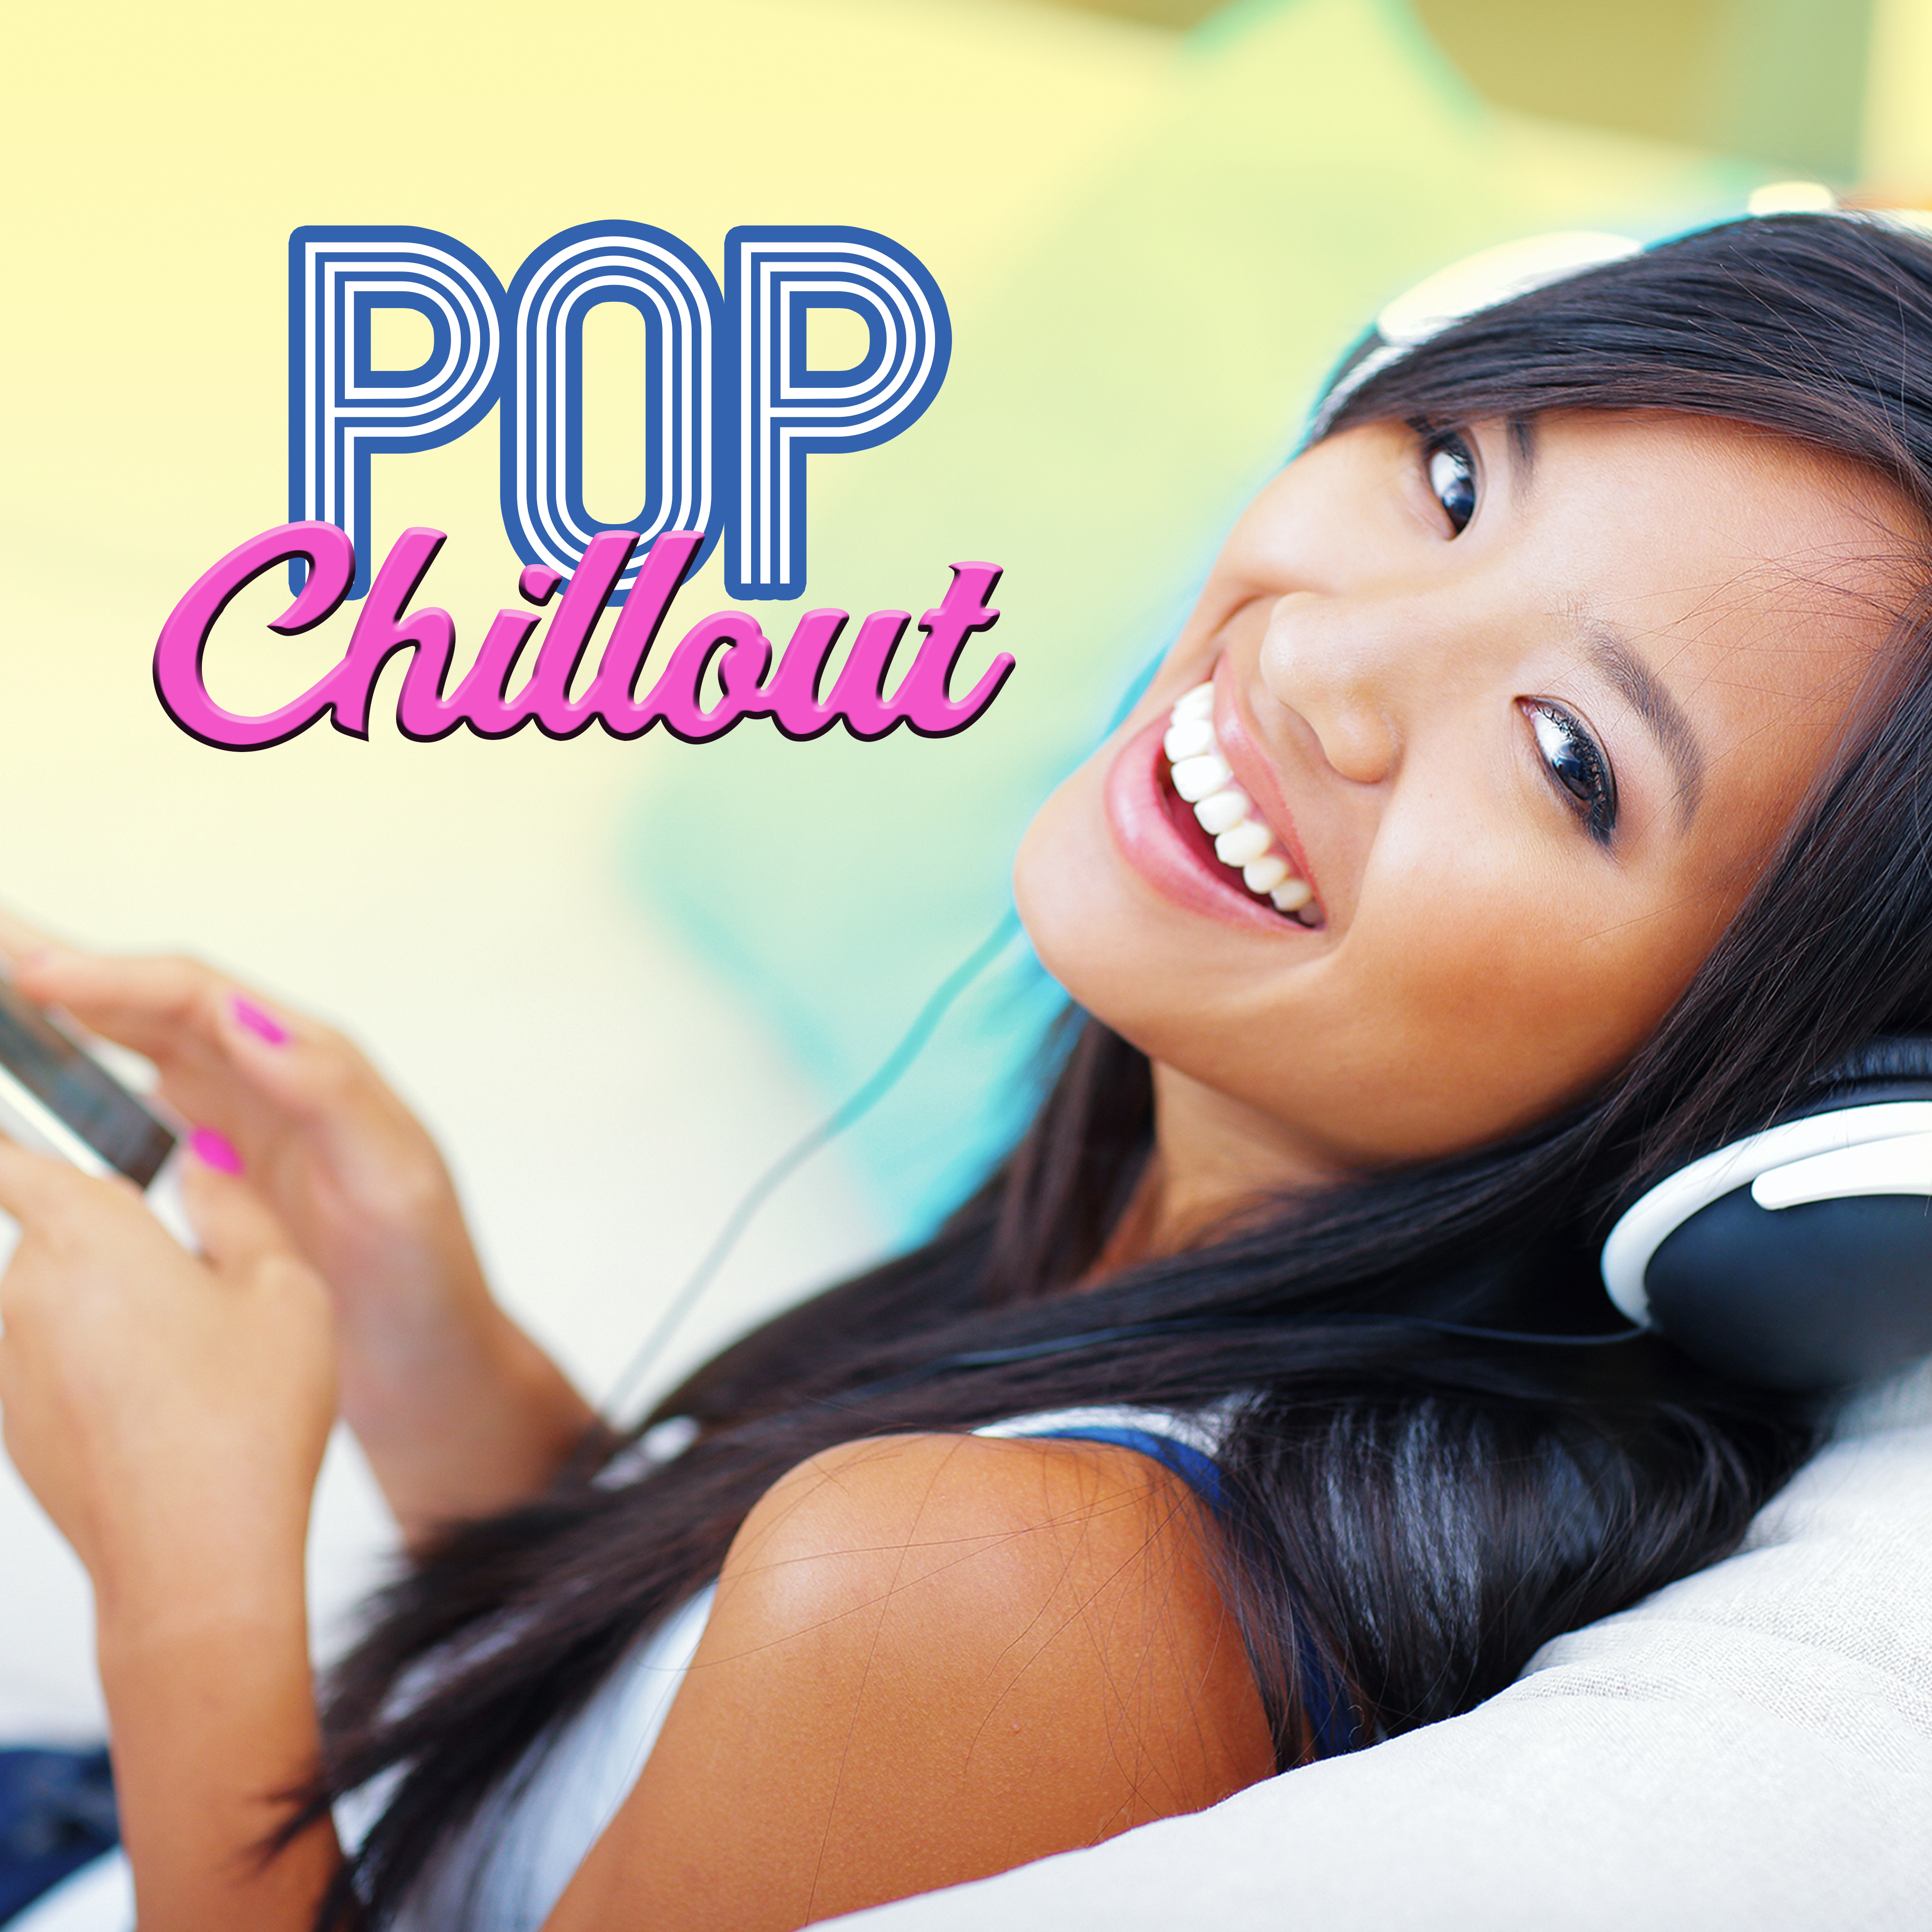 Pop Chillout – Summer Chillout, Relax, Under The Palms, Beach House, Kos Lounge